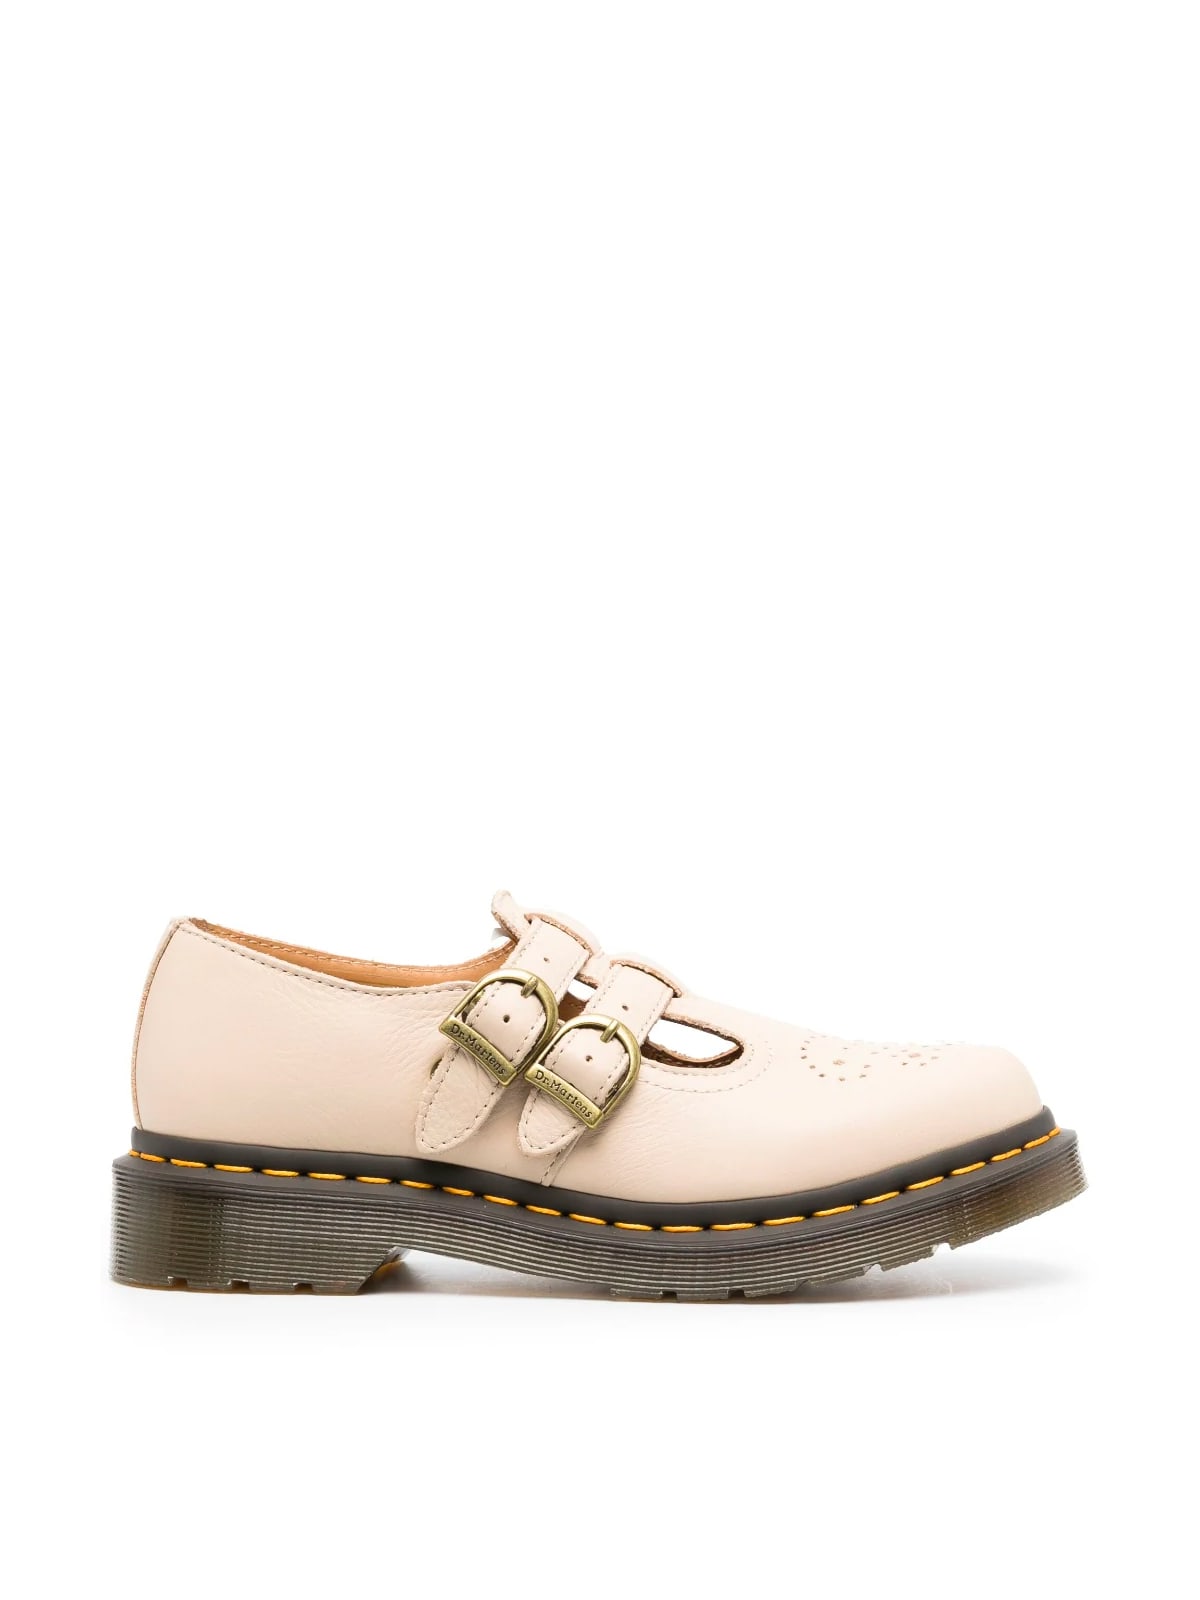 DR. MARTENS' MARY JANE OPEN SHOES WITH 2 -EYE